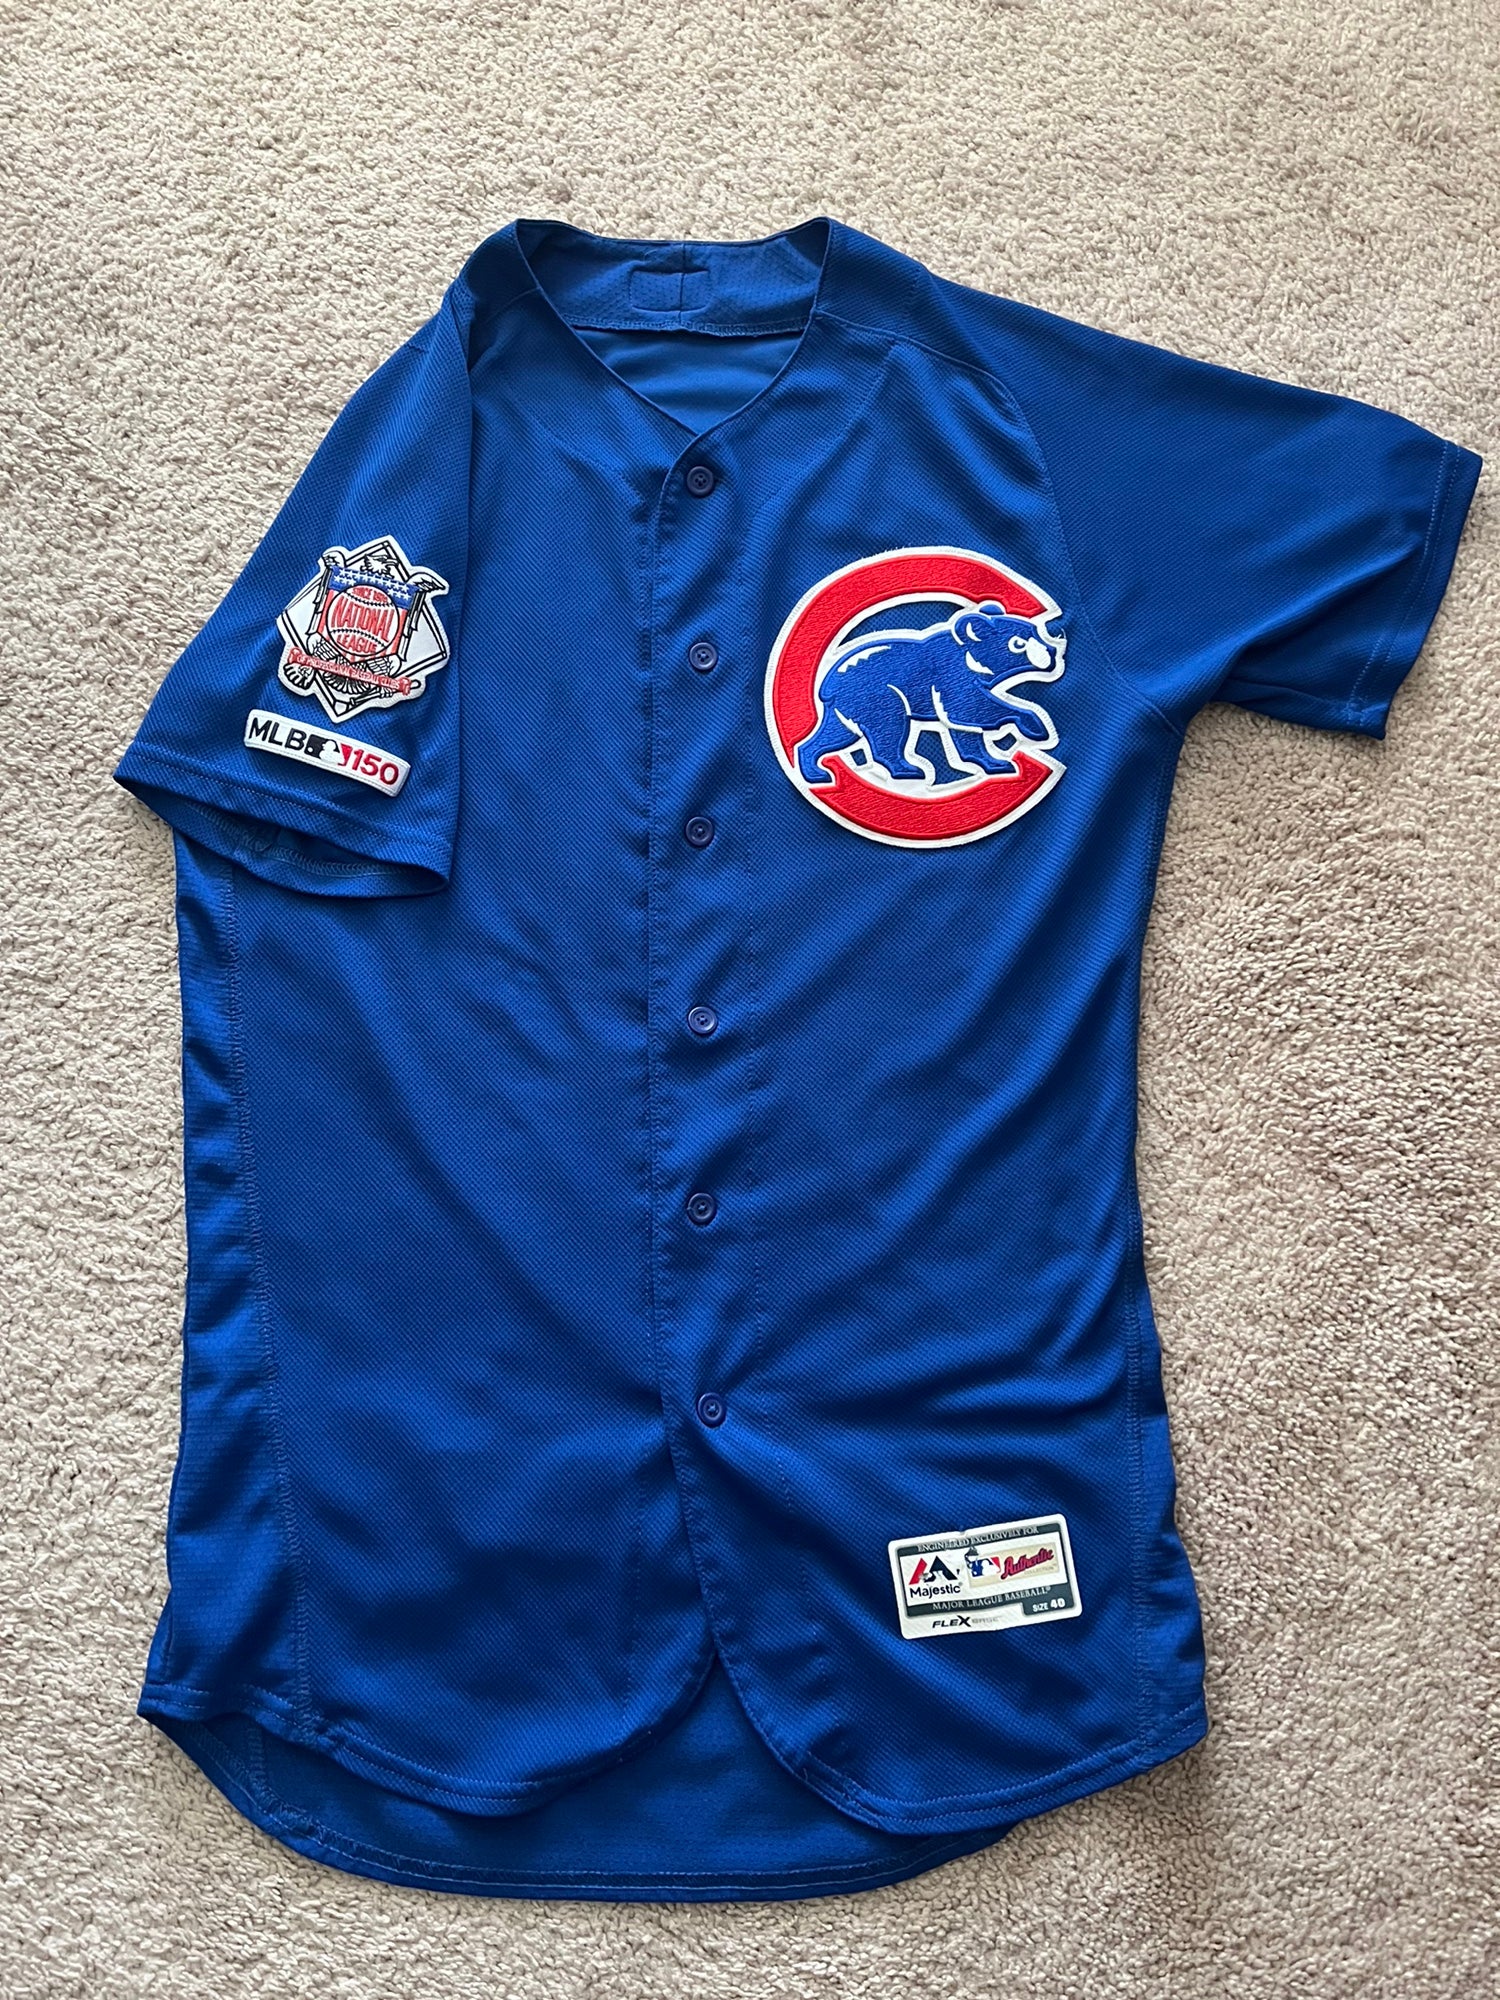 mlb chicago cubs jersey